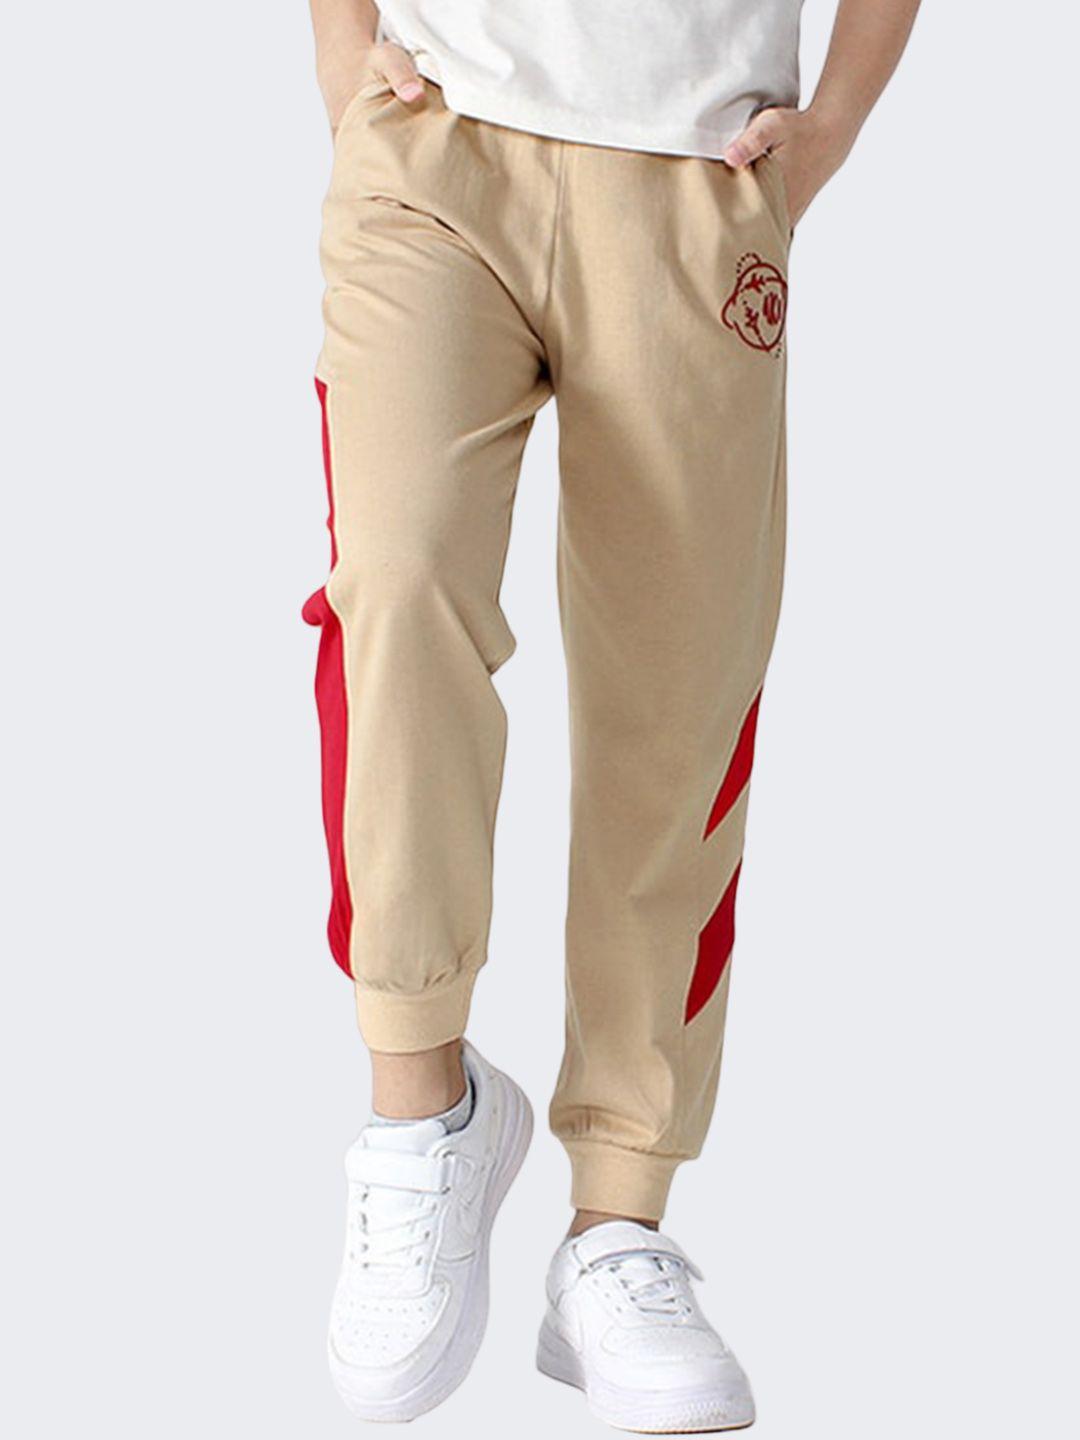 stylecast-boys-beige-striped-easy-wash-cotton-joggers